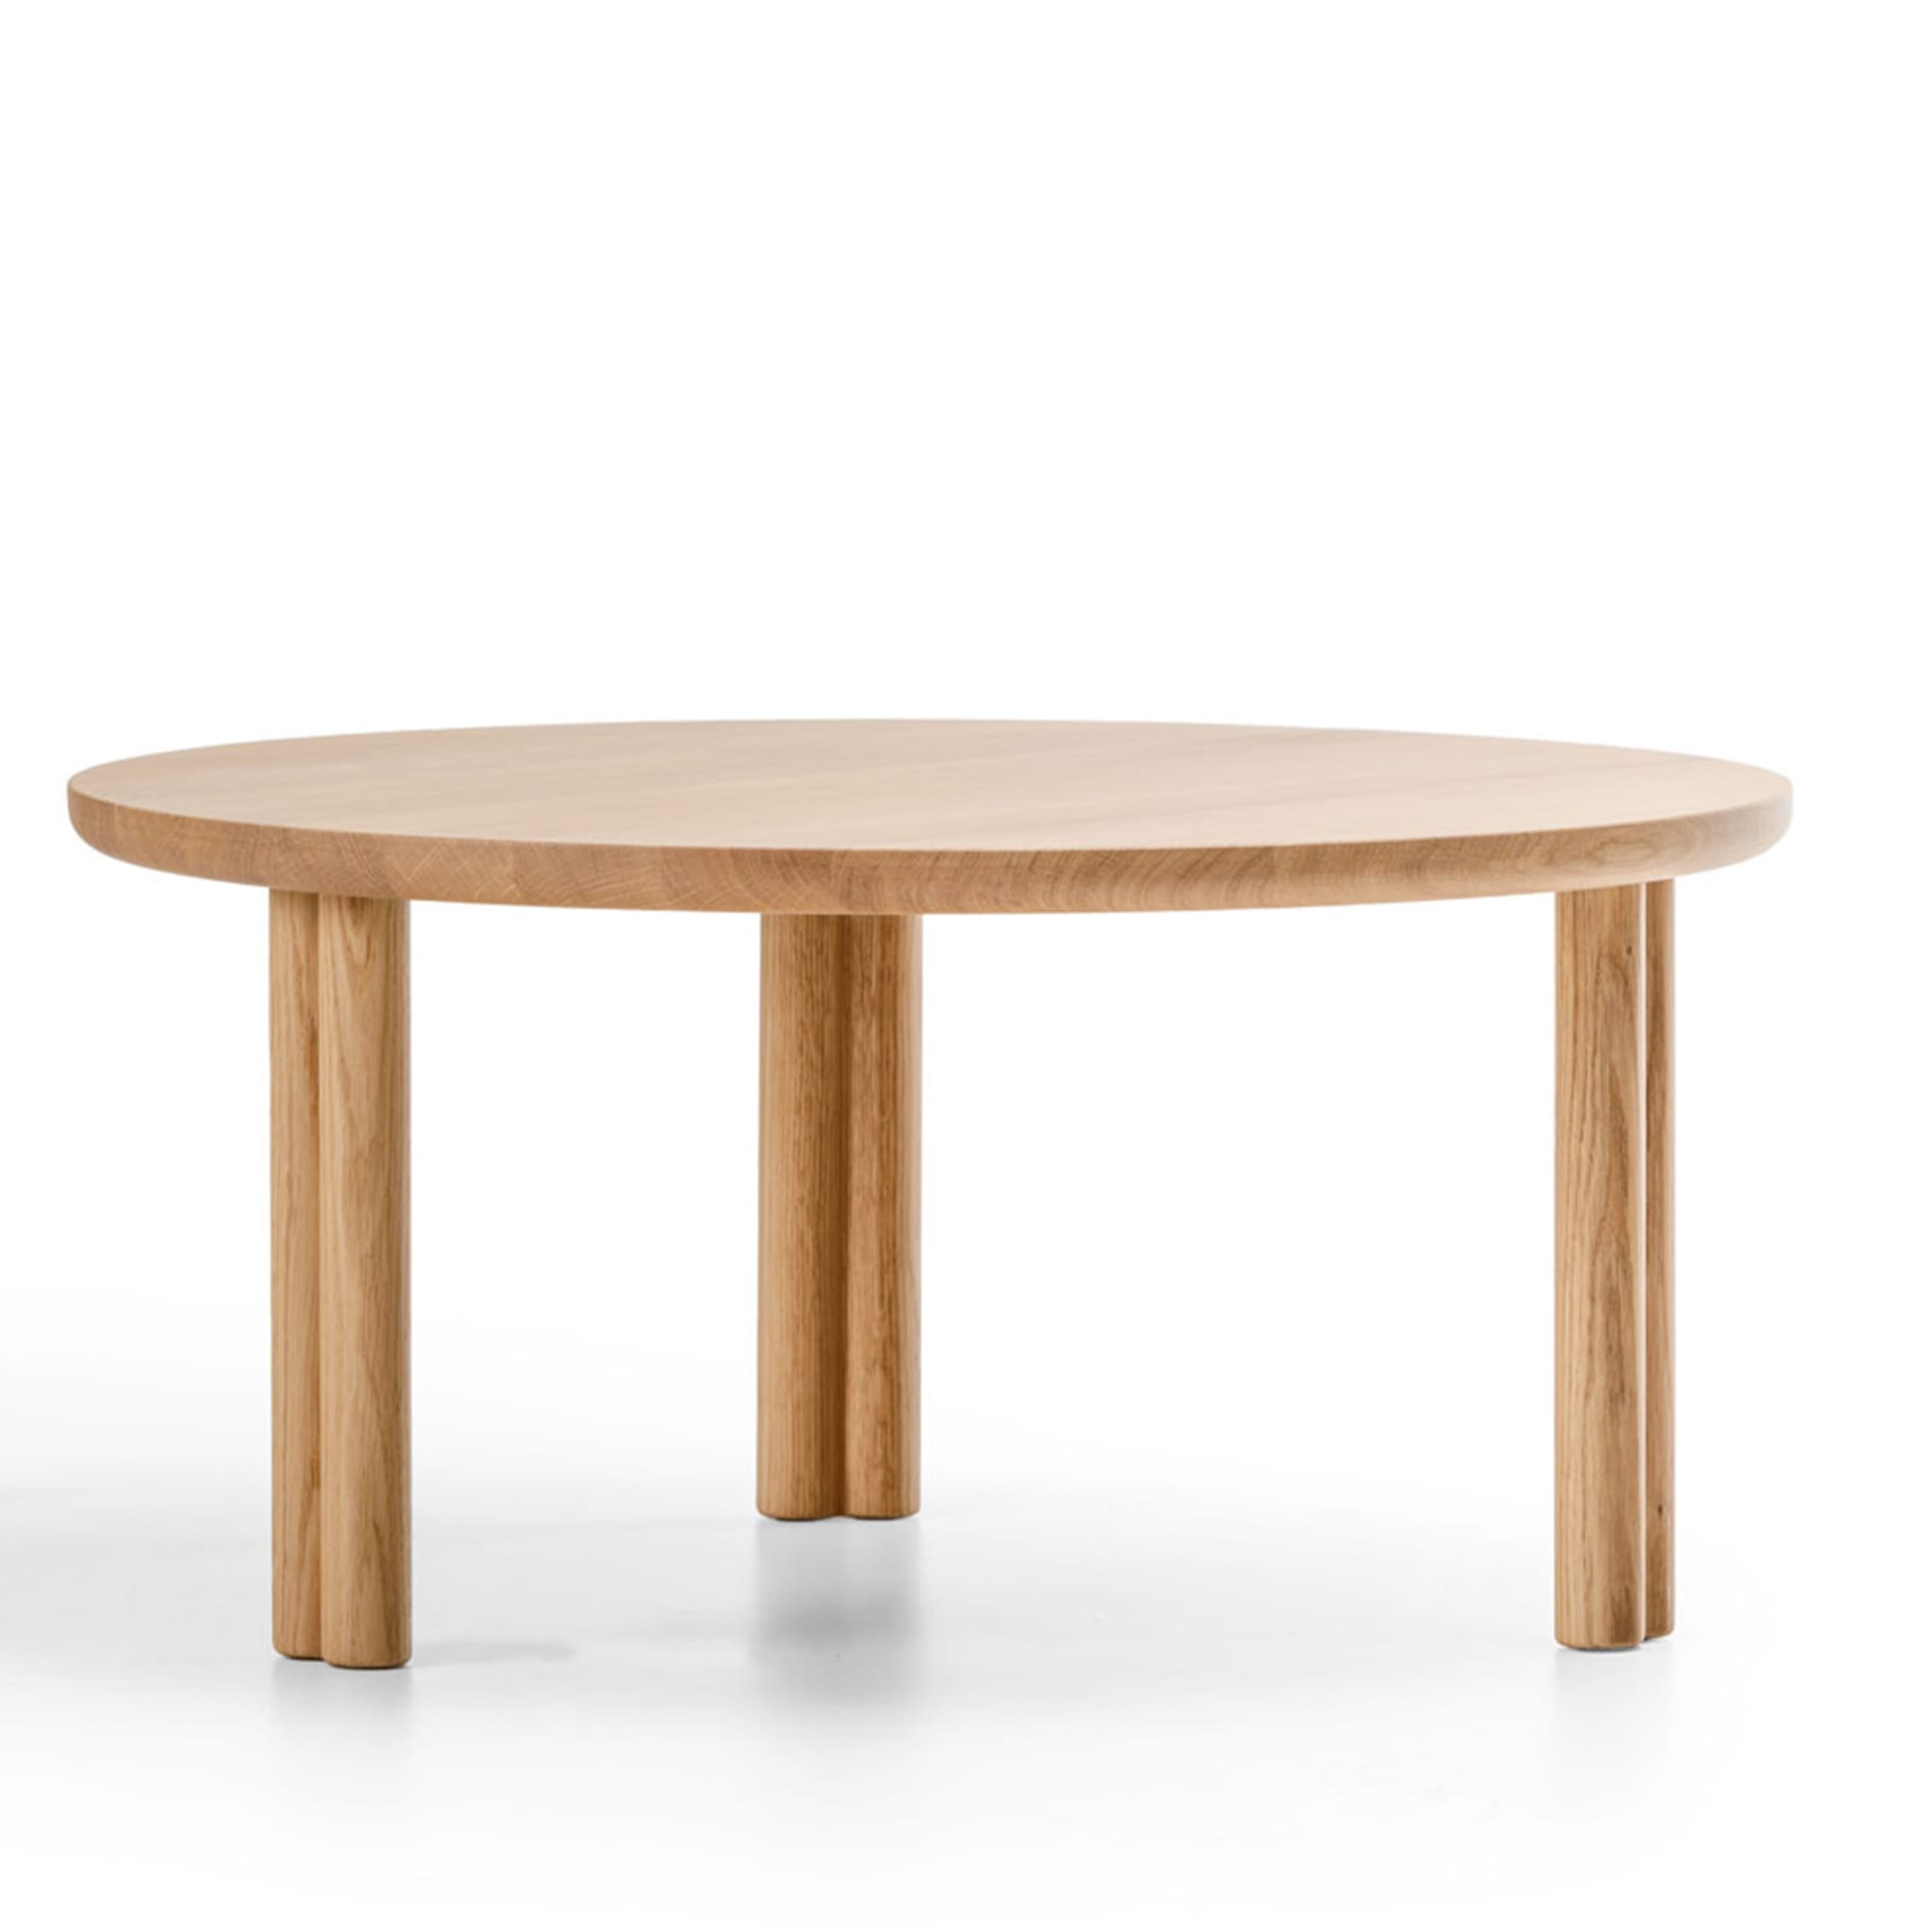 Silvestro Round Low Coffee Table - Alternative view 3